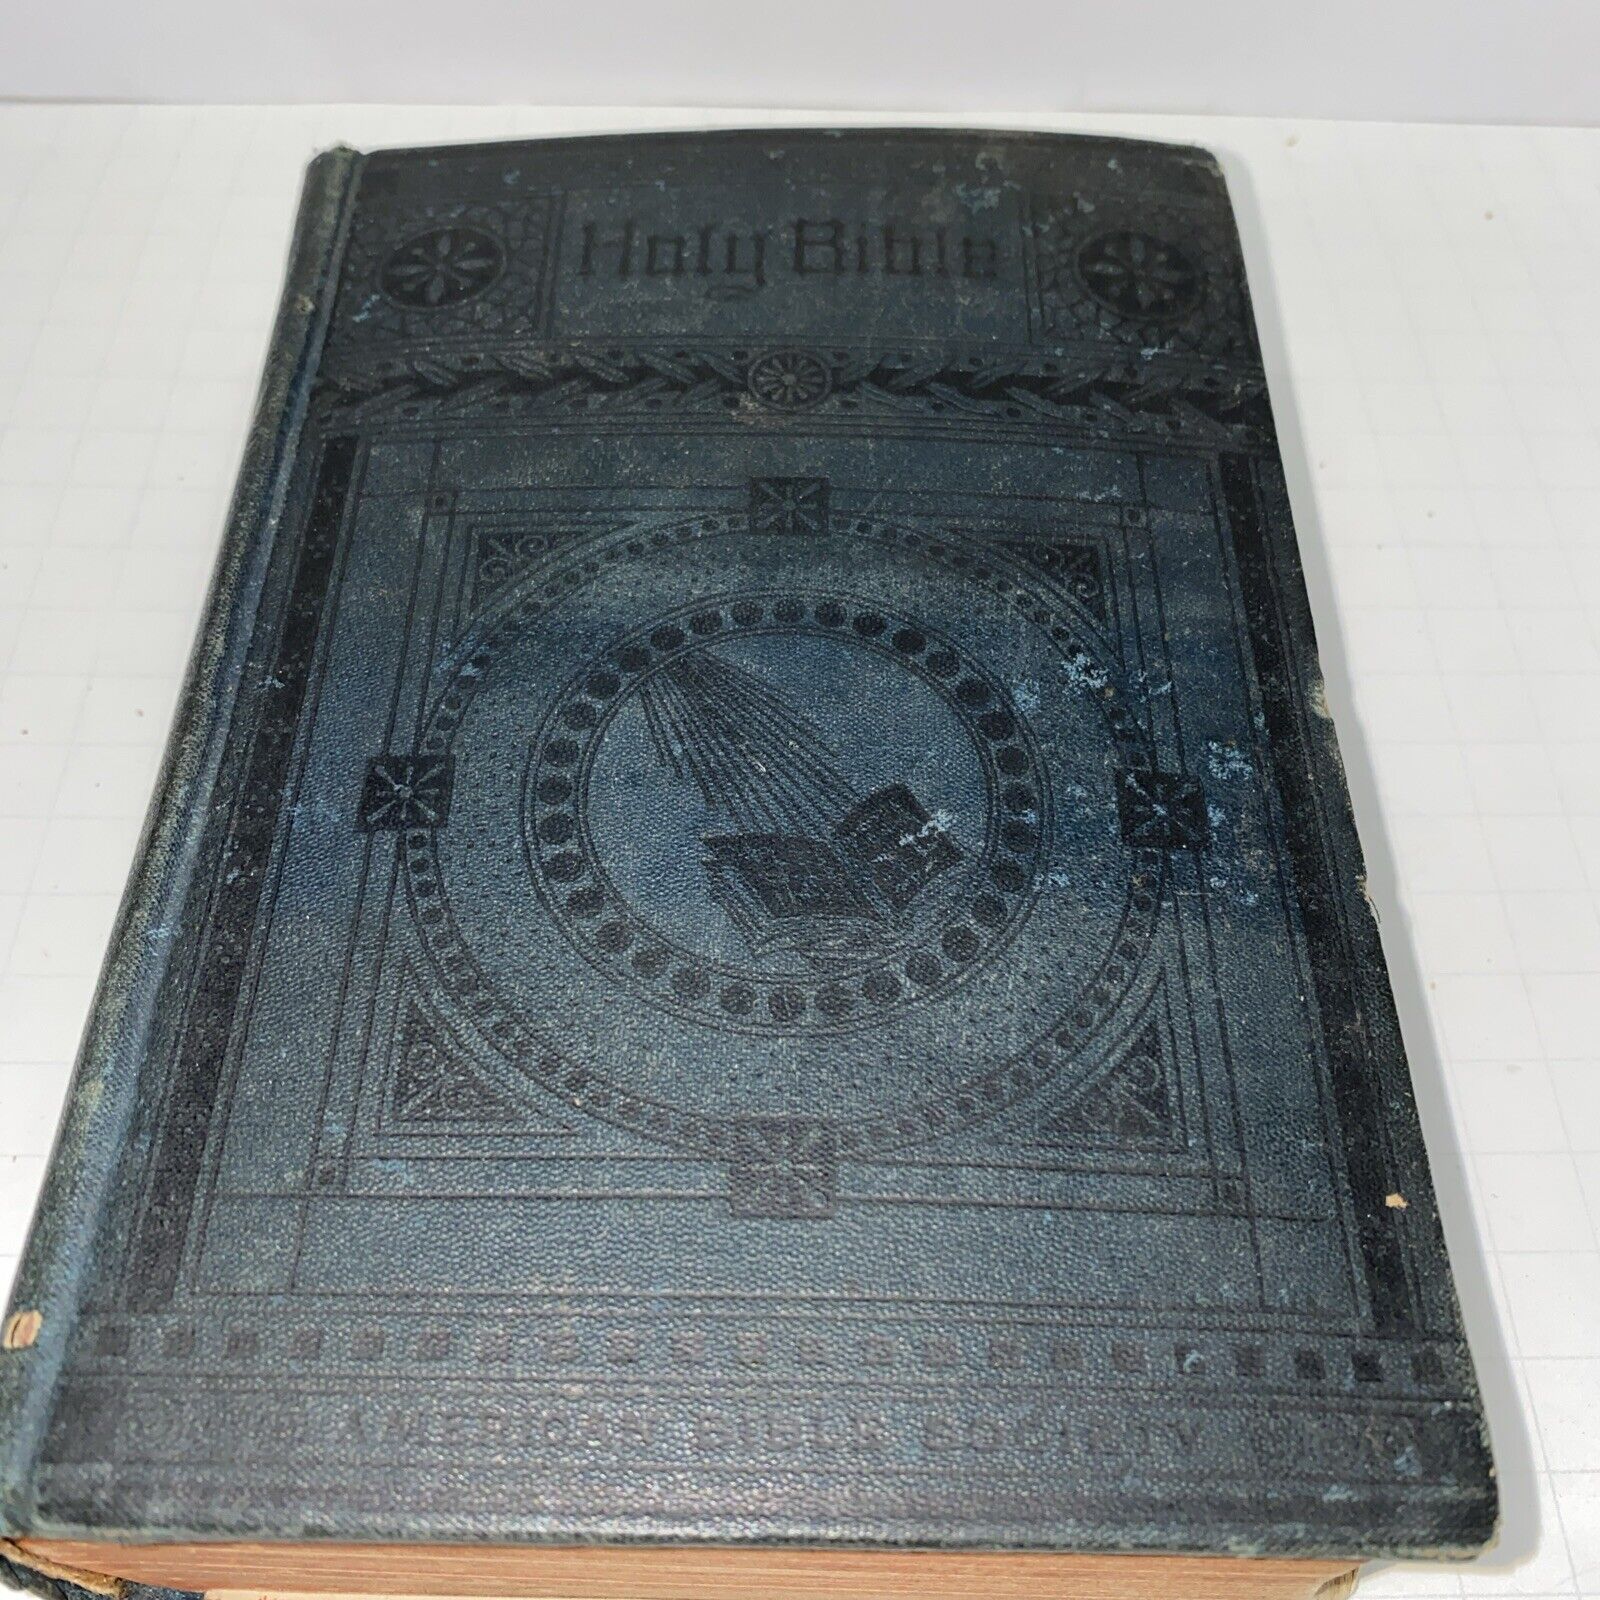 1888 ANTIQUE HOLY BIBLE AMERICAN BIBLE SOCIETY Leather Bound God 11th Edition